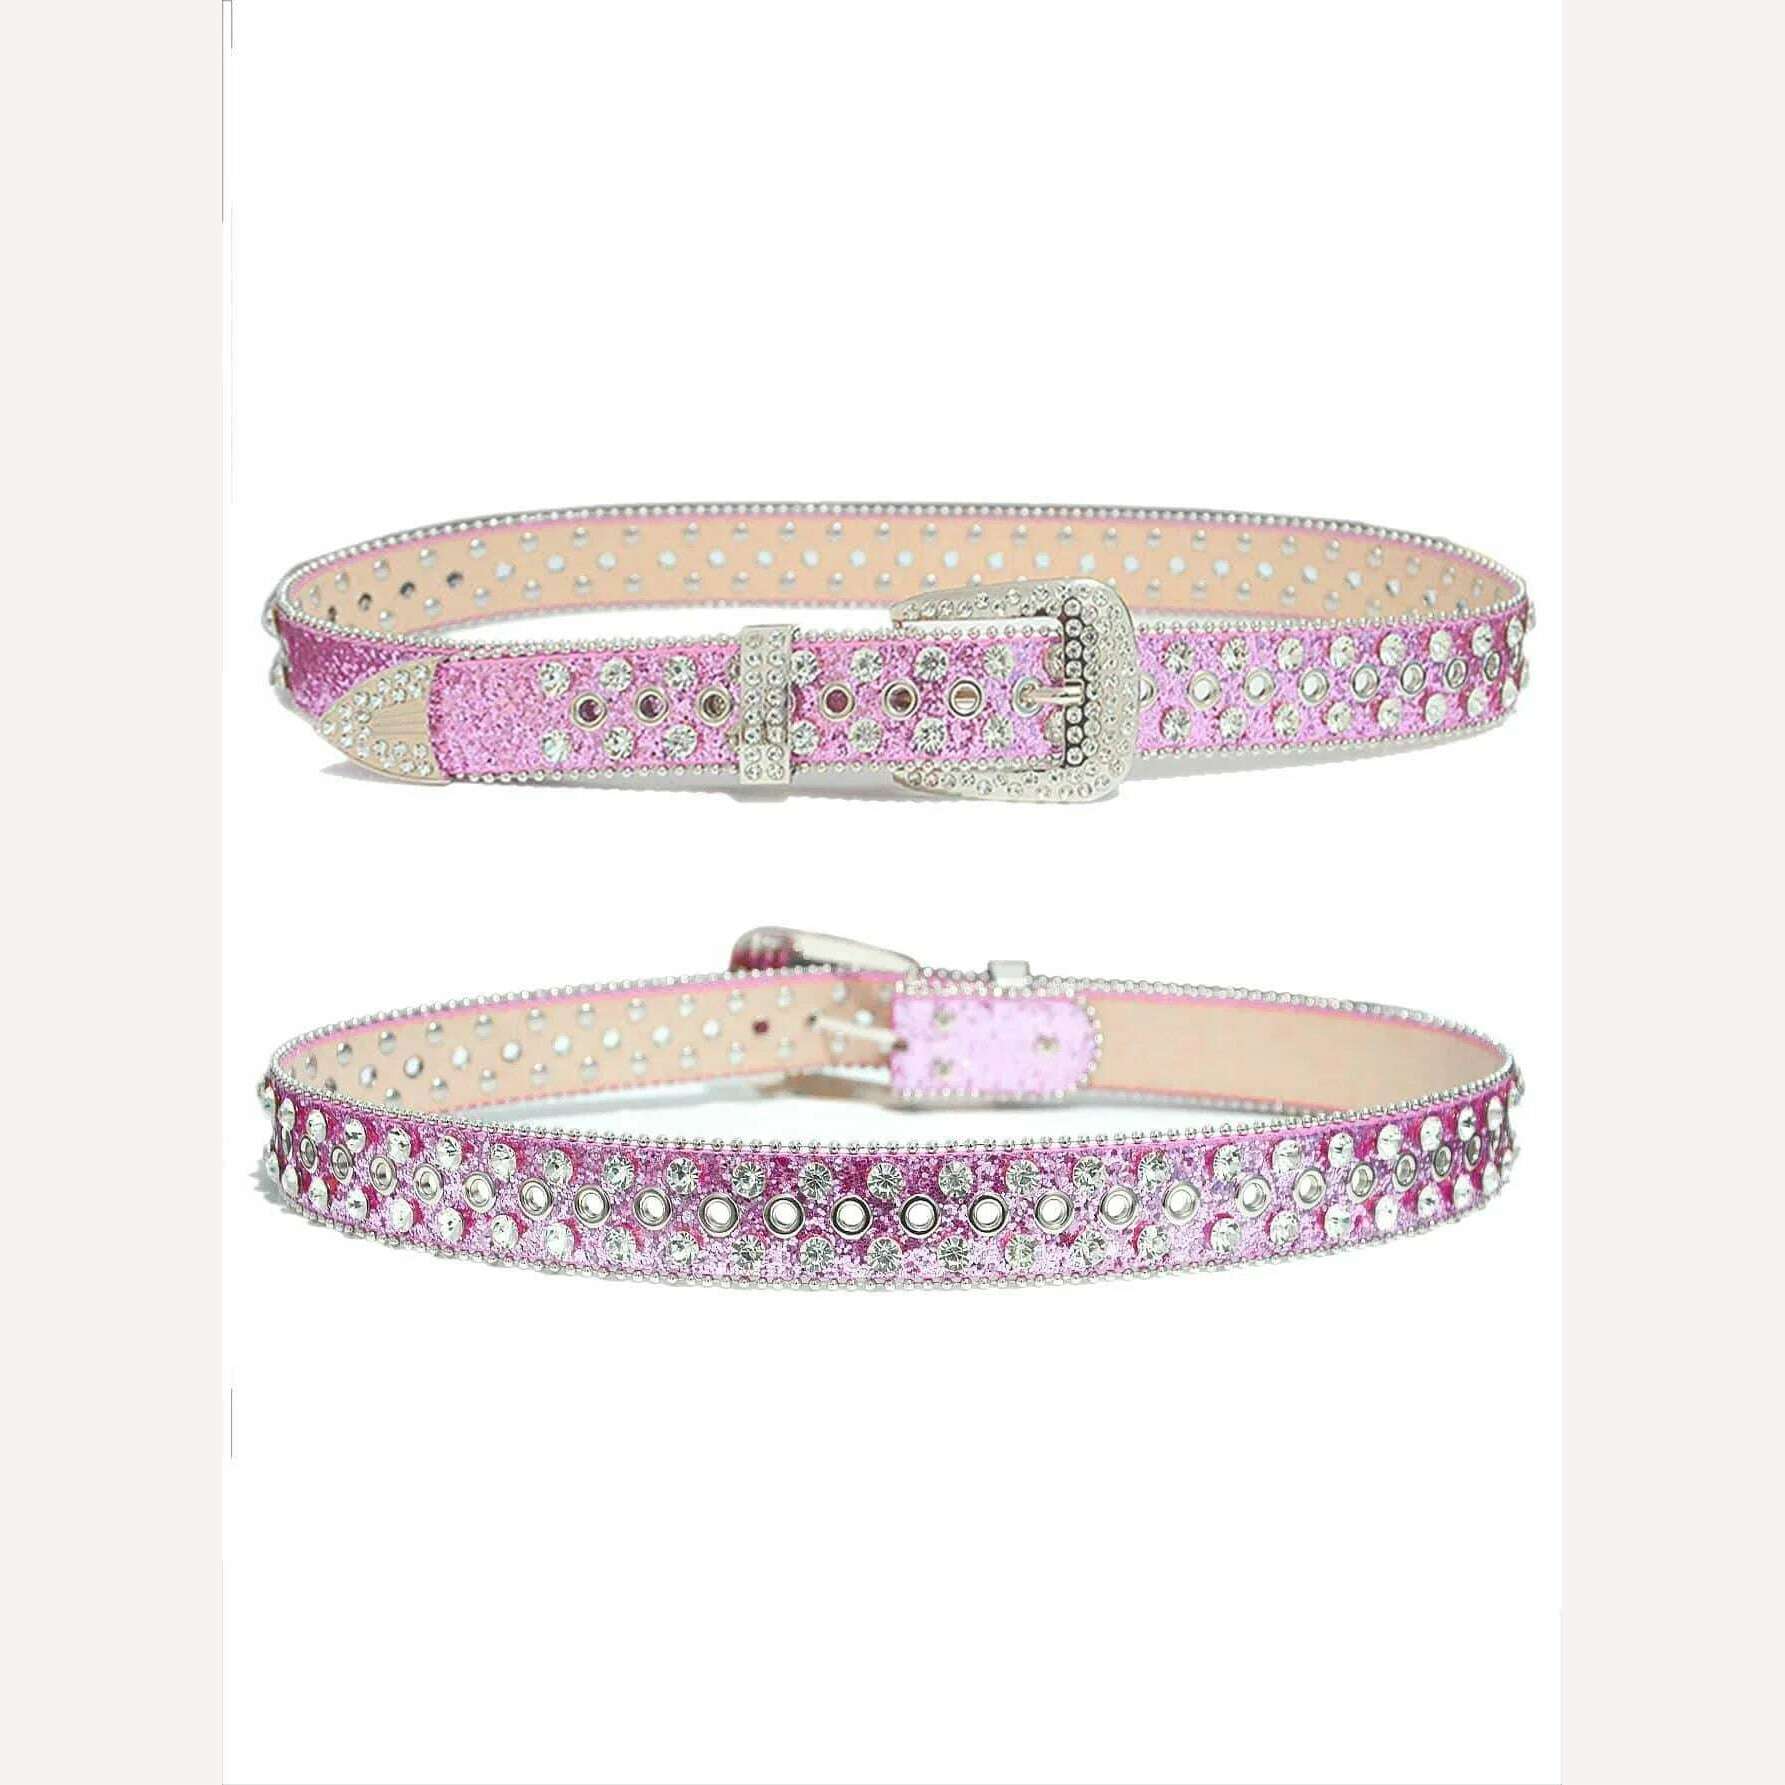 KIMLUD, Gorgeous Rhinestone Studded Belt - Perfect Gift for Her on Valentine's Day or Wedding Party!, Pink / 100CM, KIMLUD Womens Clothes